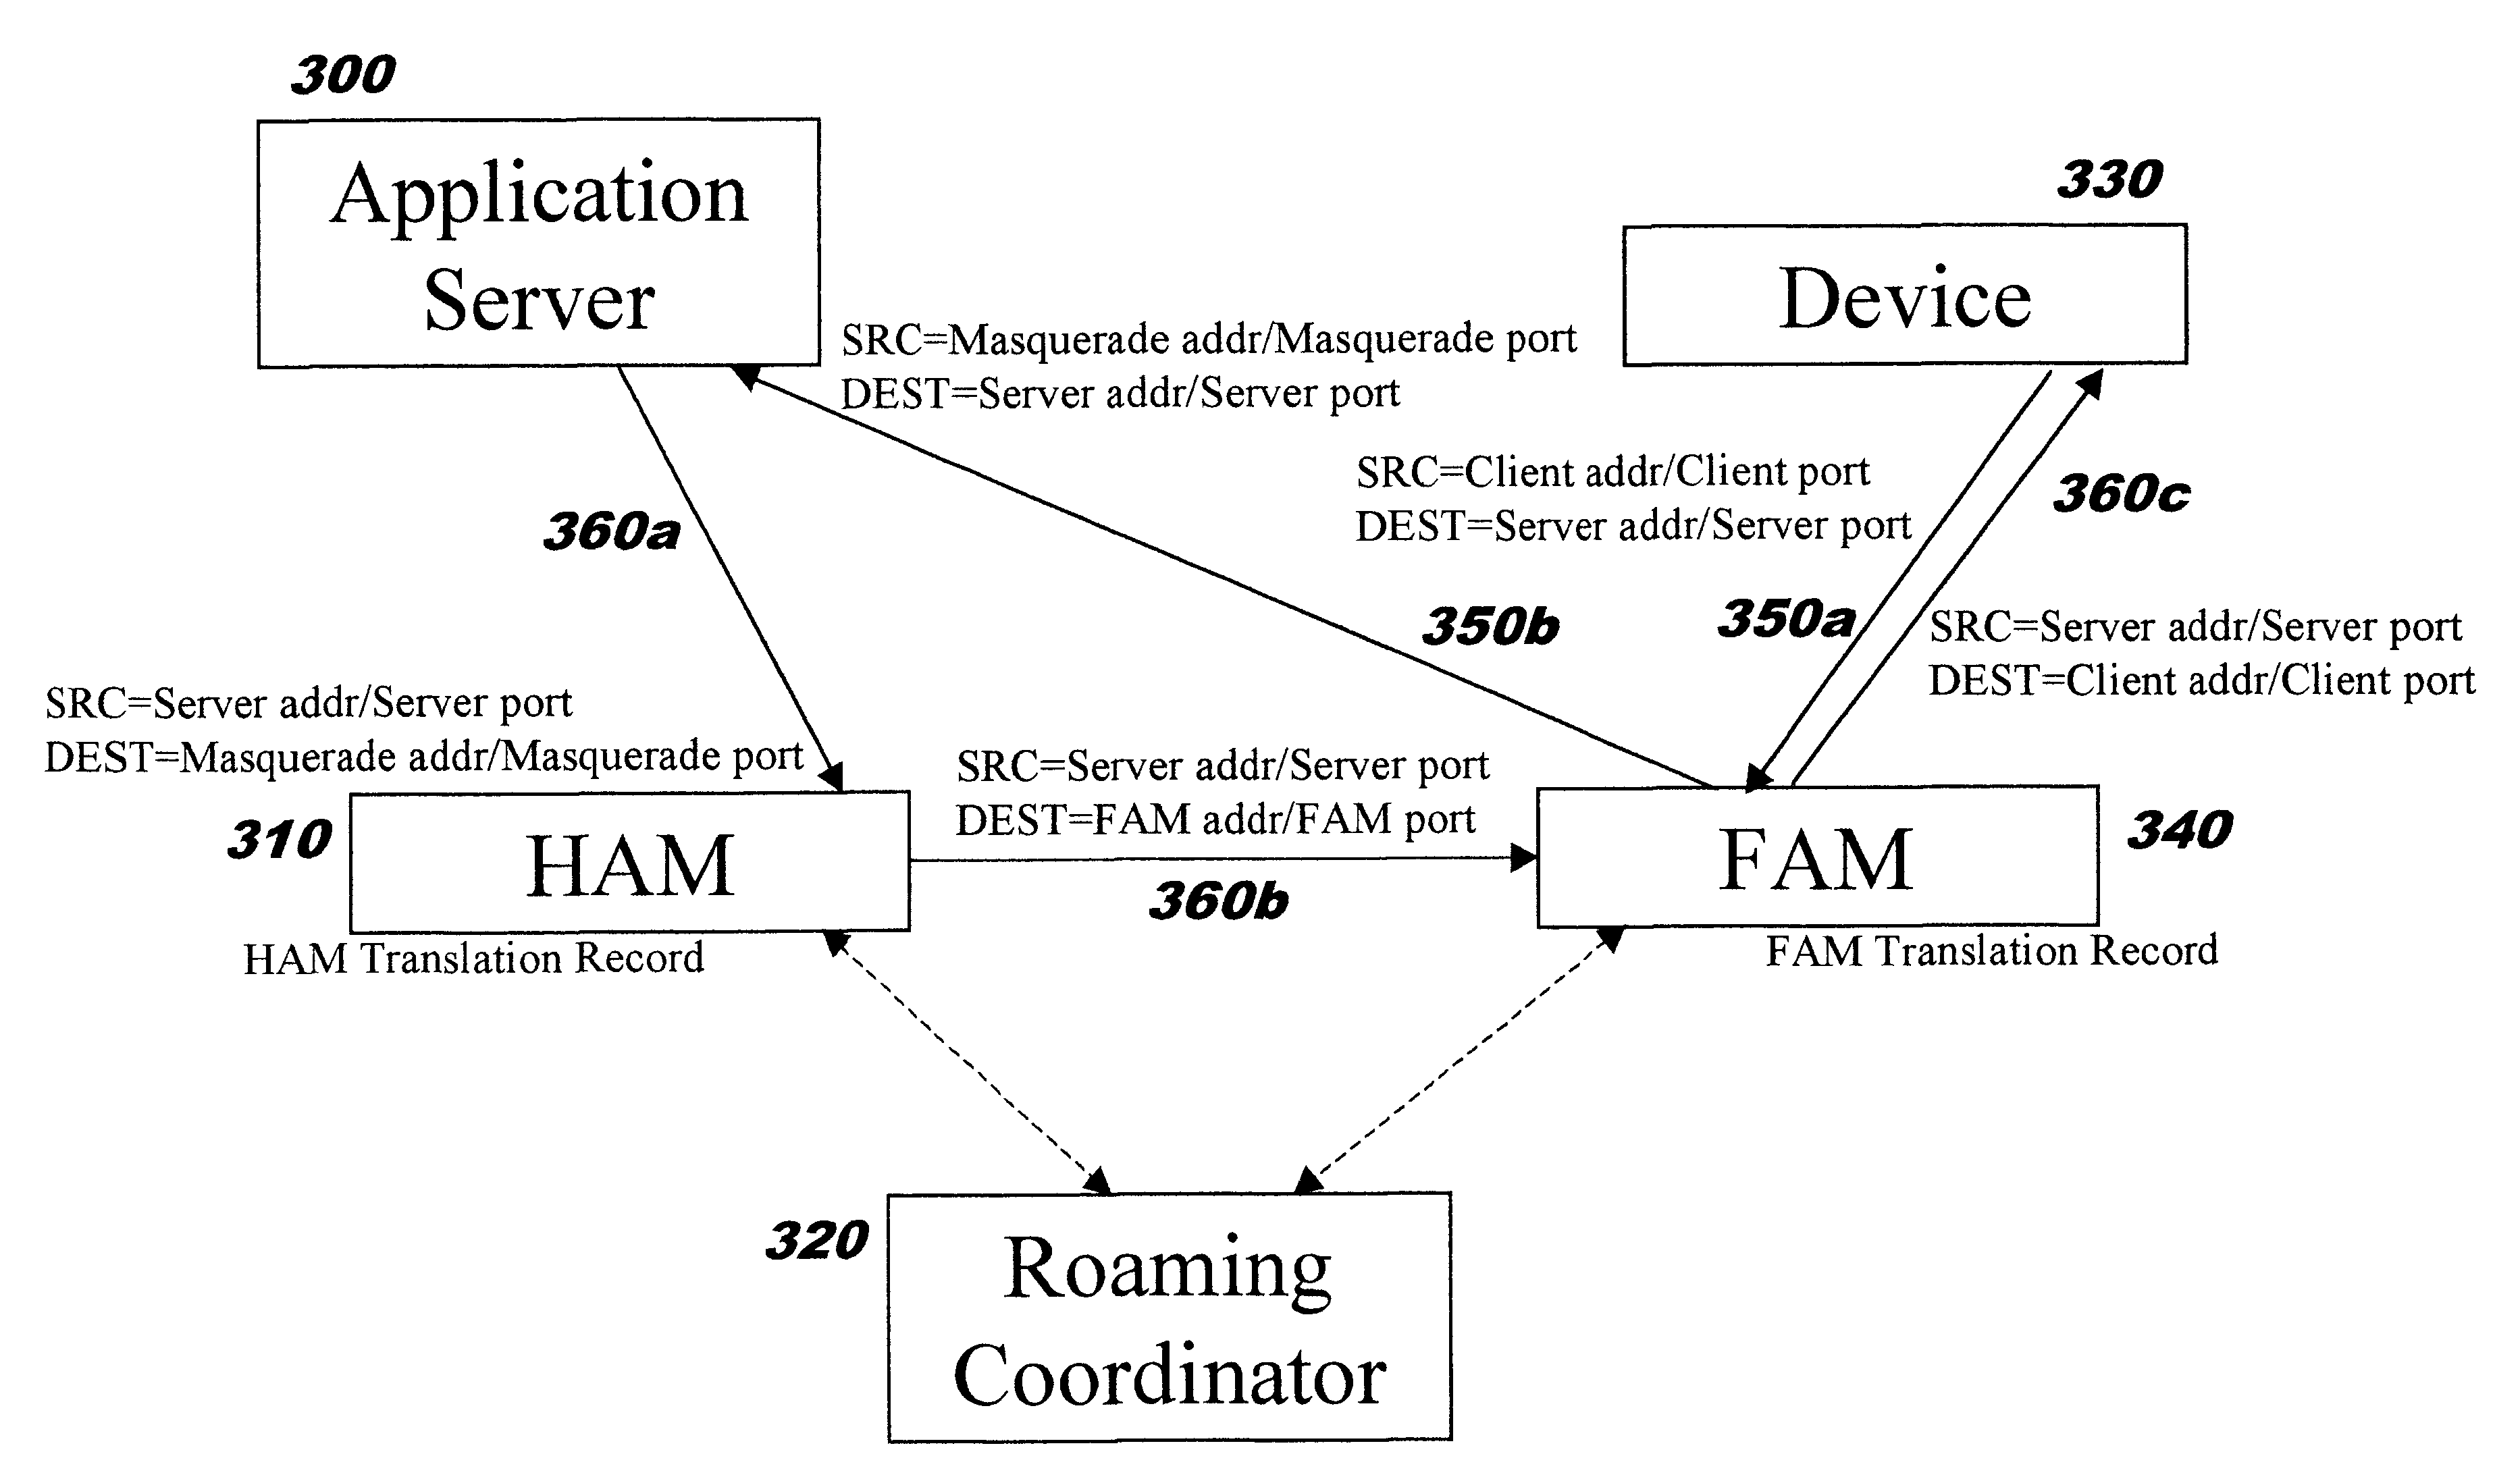 Providing secure network access for short-range wireless computing devices